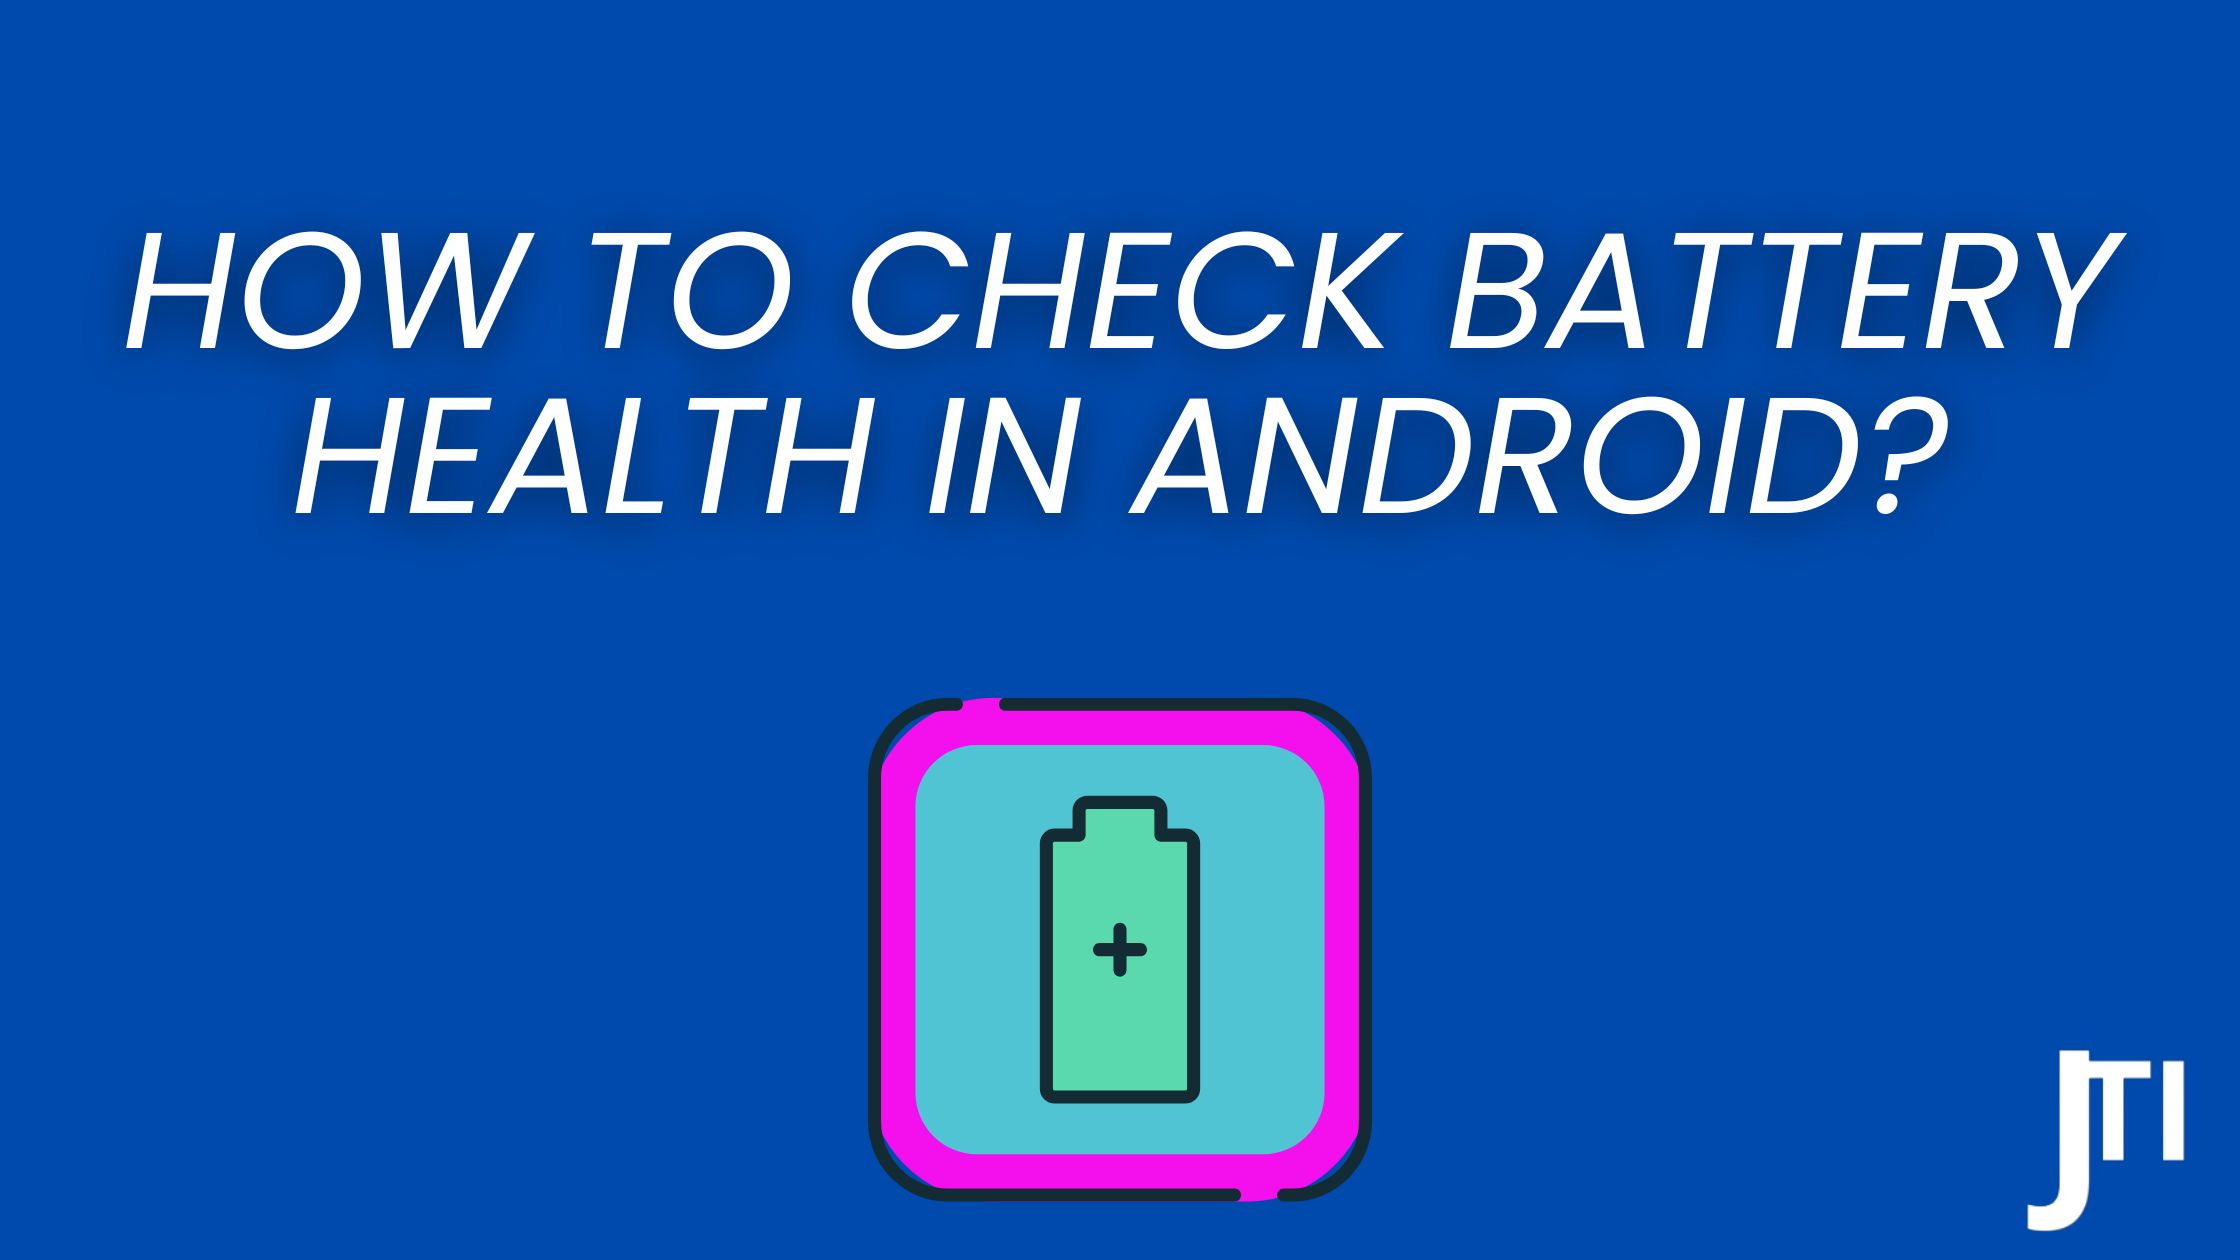 How To Check Battery Health In Android? (5 Best Ways)